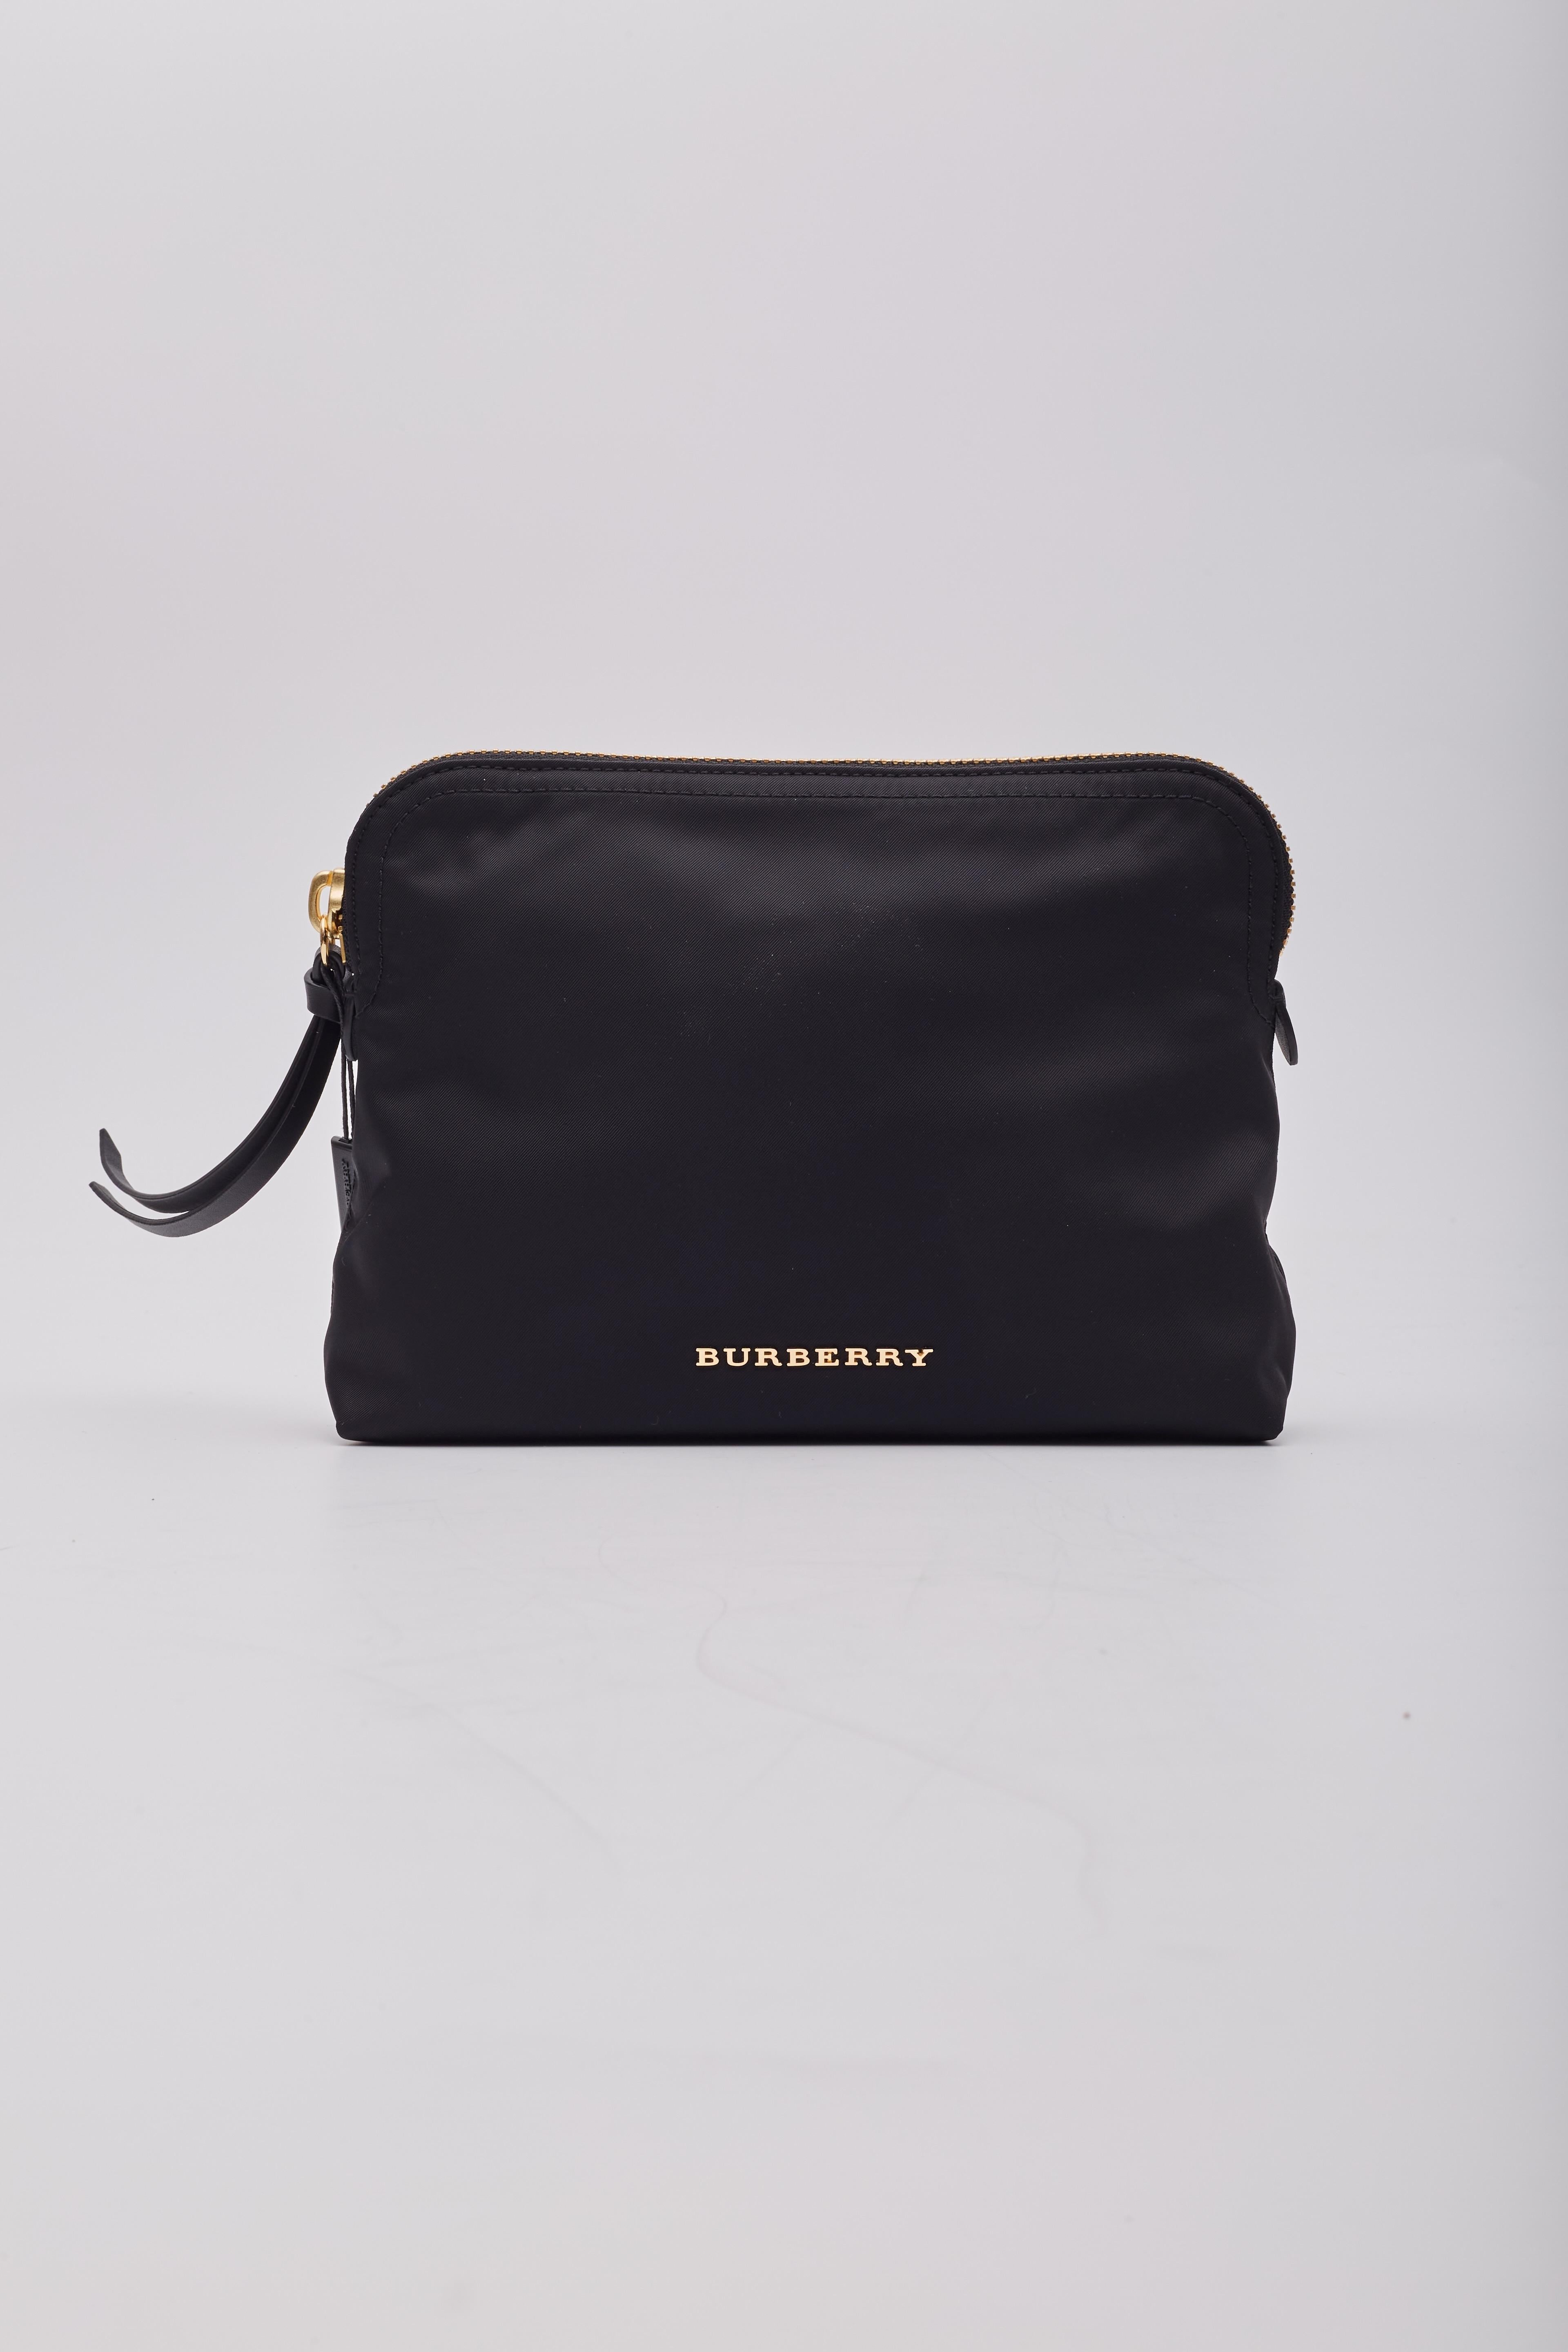 Burberry Black Nylon Technical Vanity Pouch Small In Excellent Condition For Sale In Montreal, Quebec